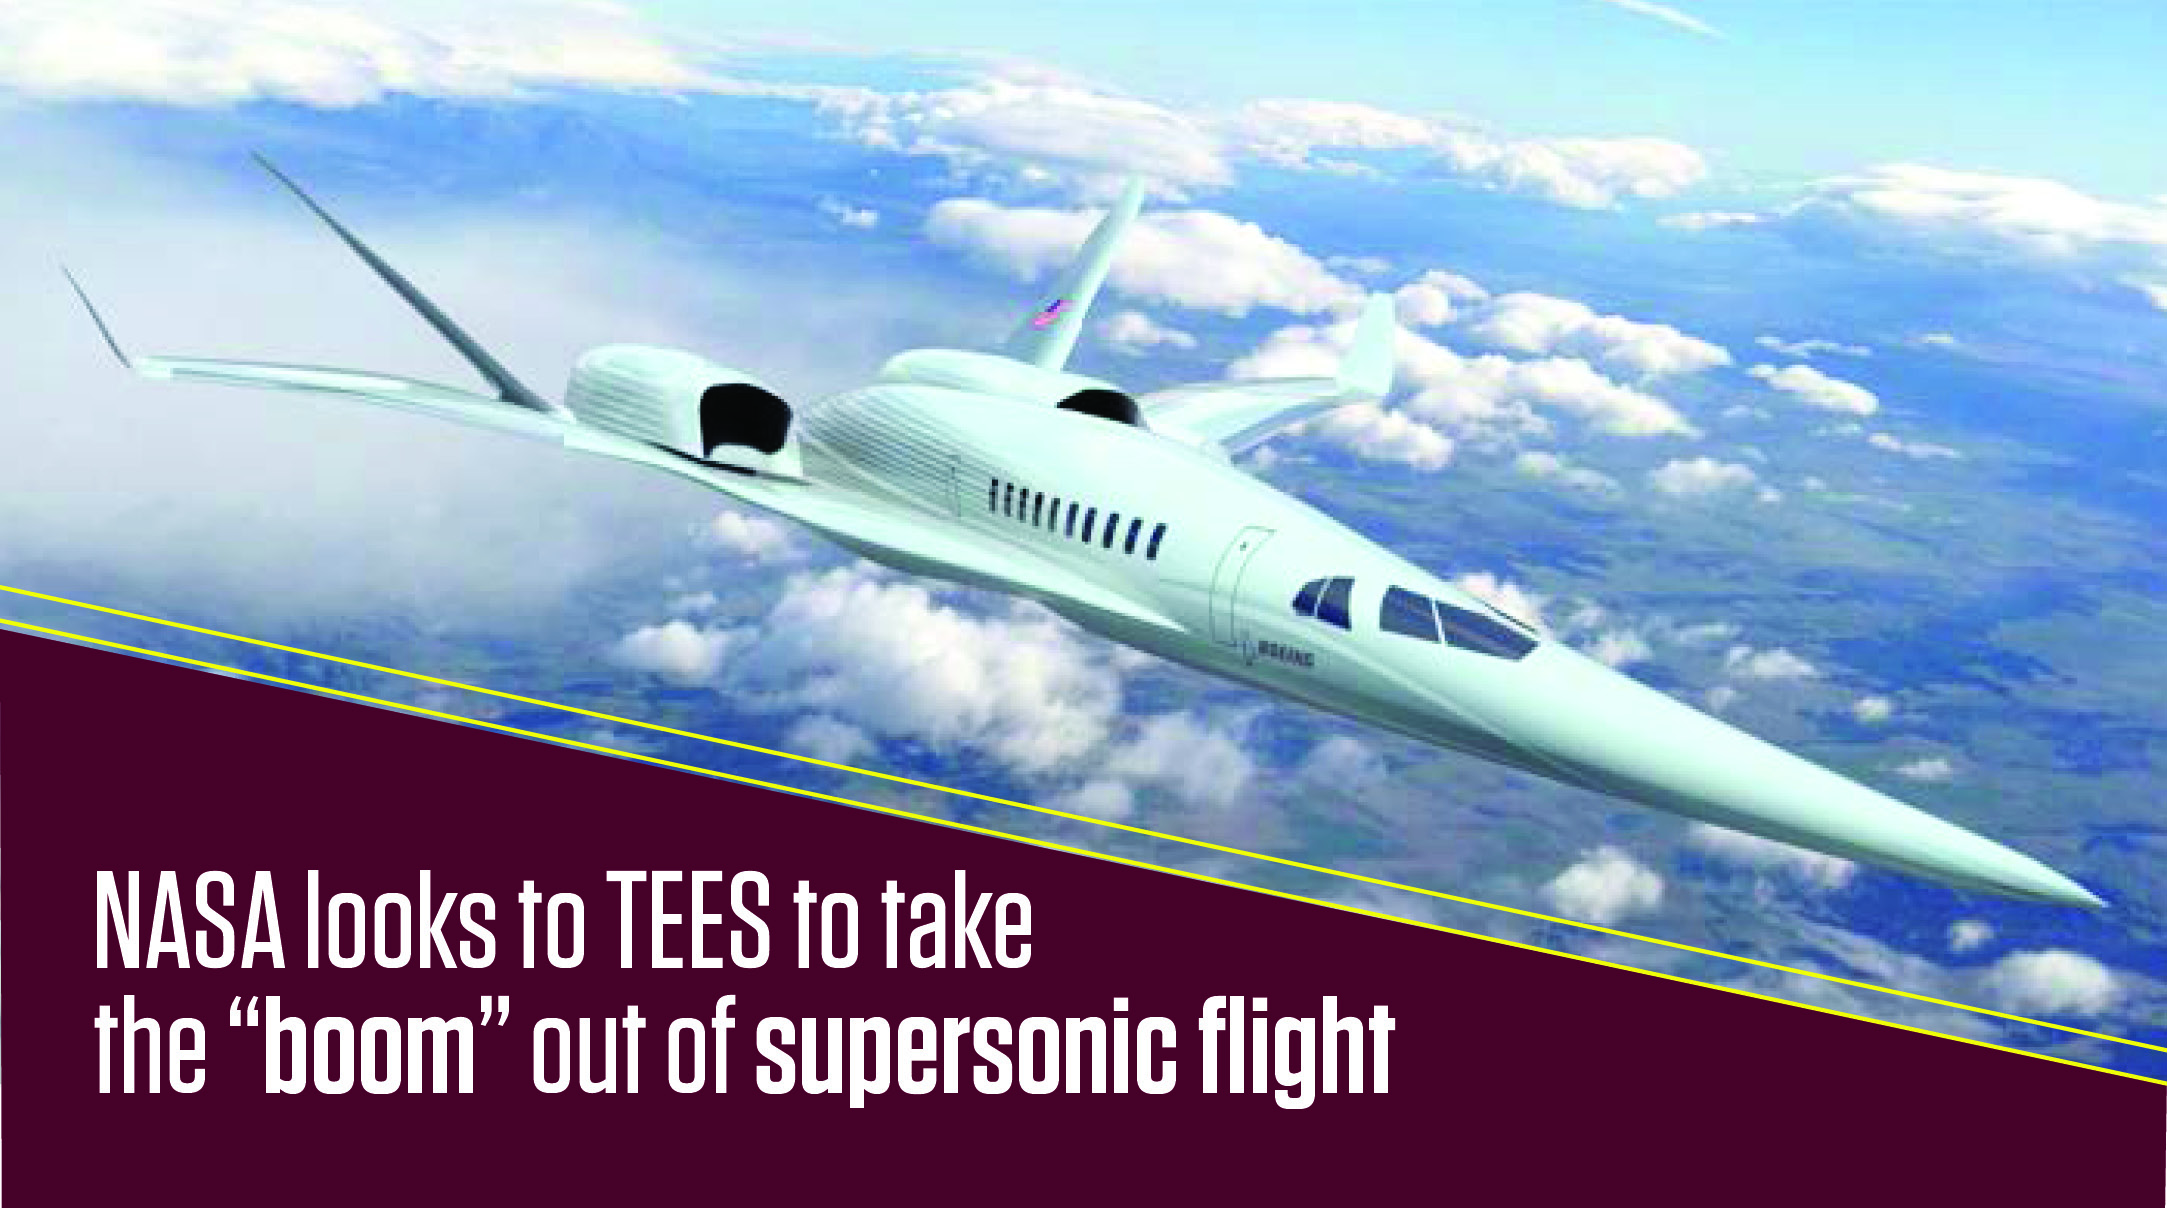 Banner of an aircraft with text "NASA looks to TEES to take the "boom" out of supersonic flight.